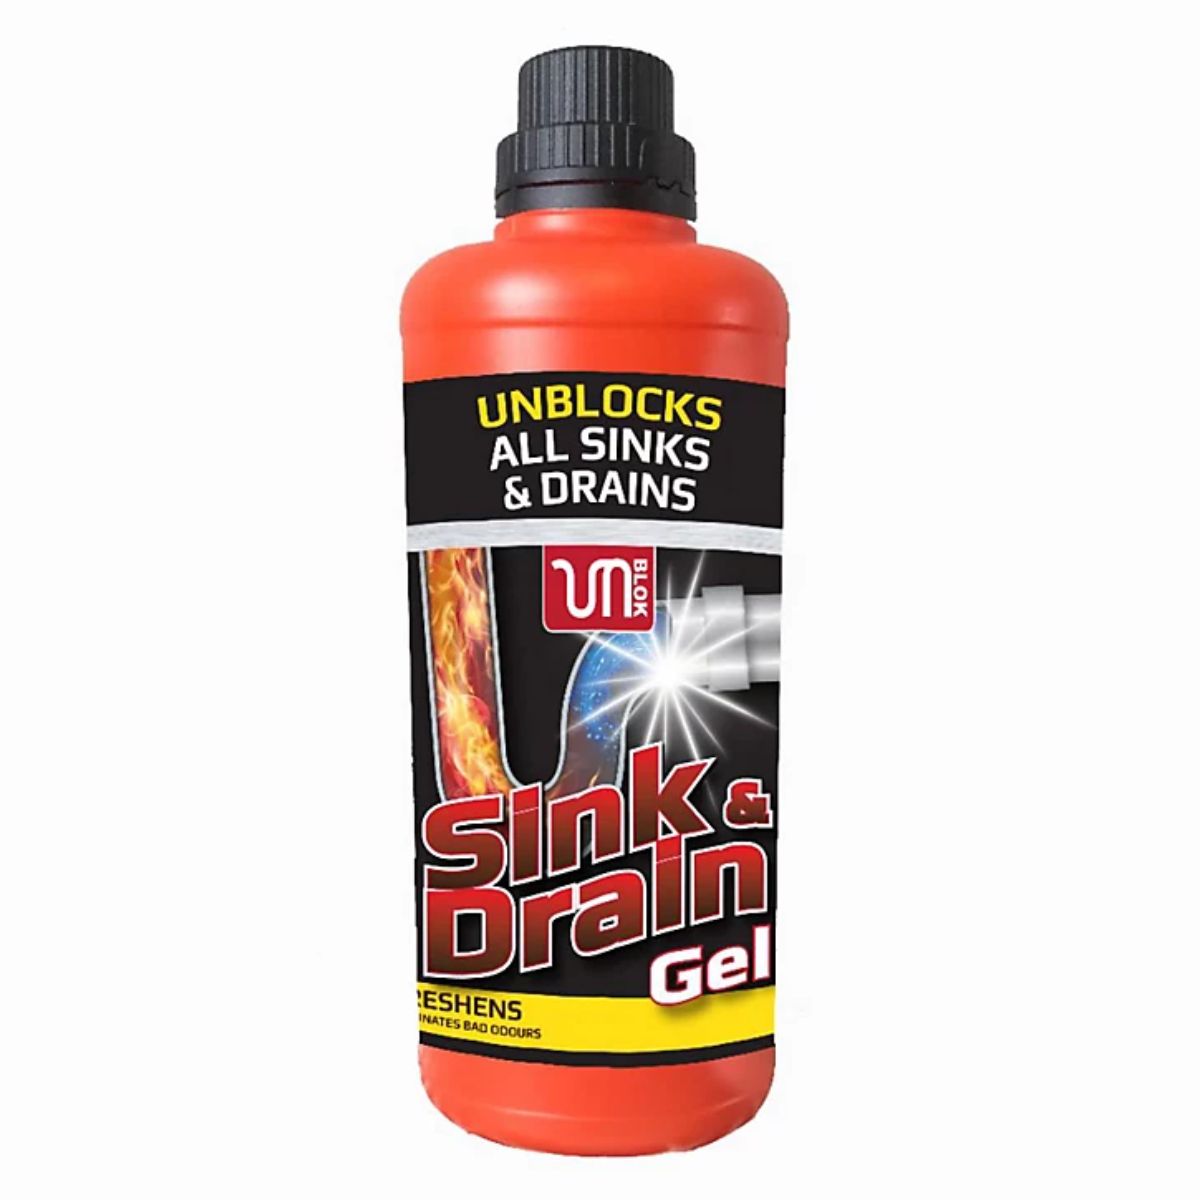 A bottle of Unblok - Sink & Drain Unblocker Gel - 1L with a label stating it unblocks all sinks and drains, featuring fiery and spark graphics.